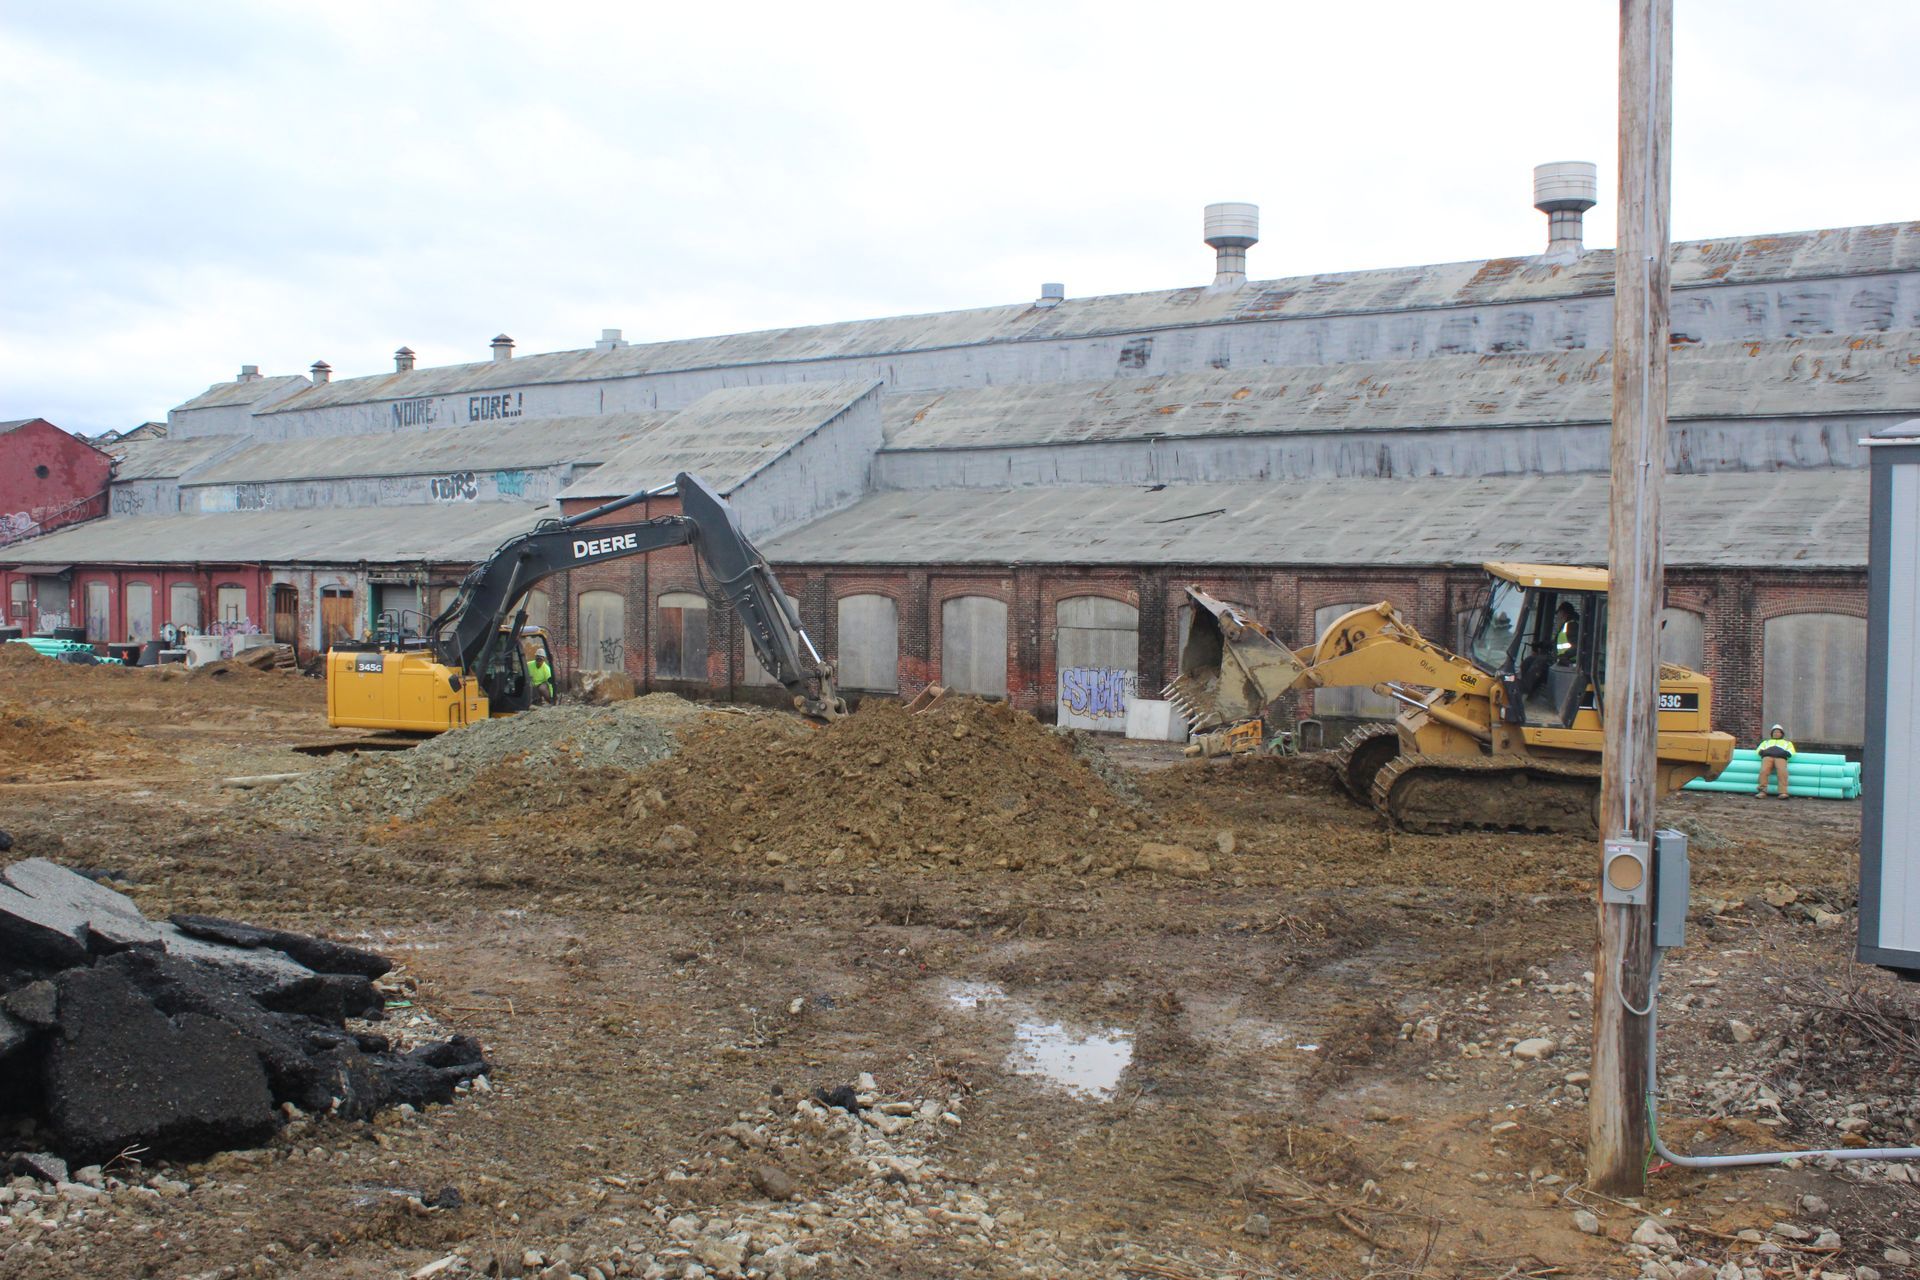 A construction site with a building in the background and a bulldozer in the foreground.